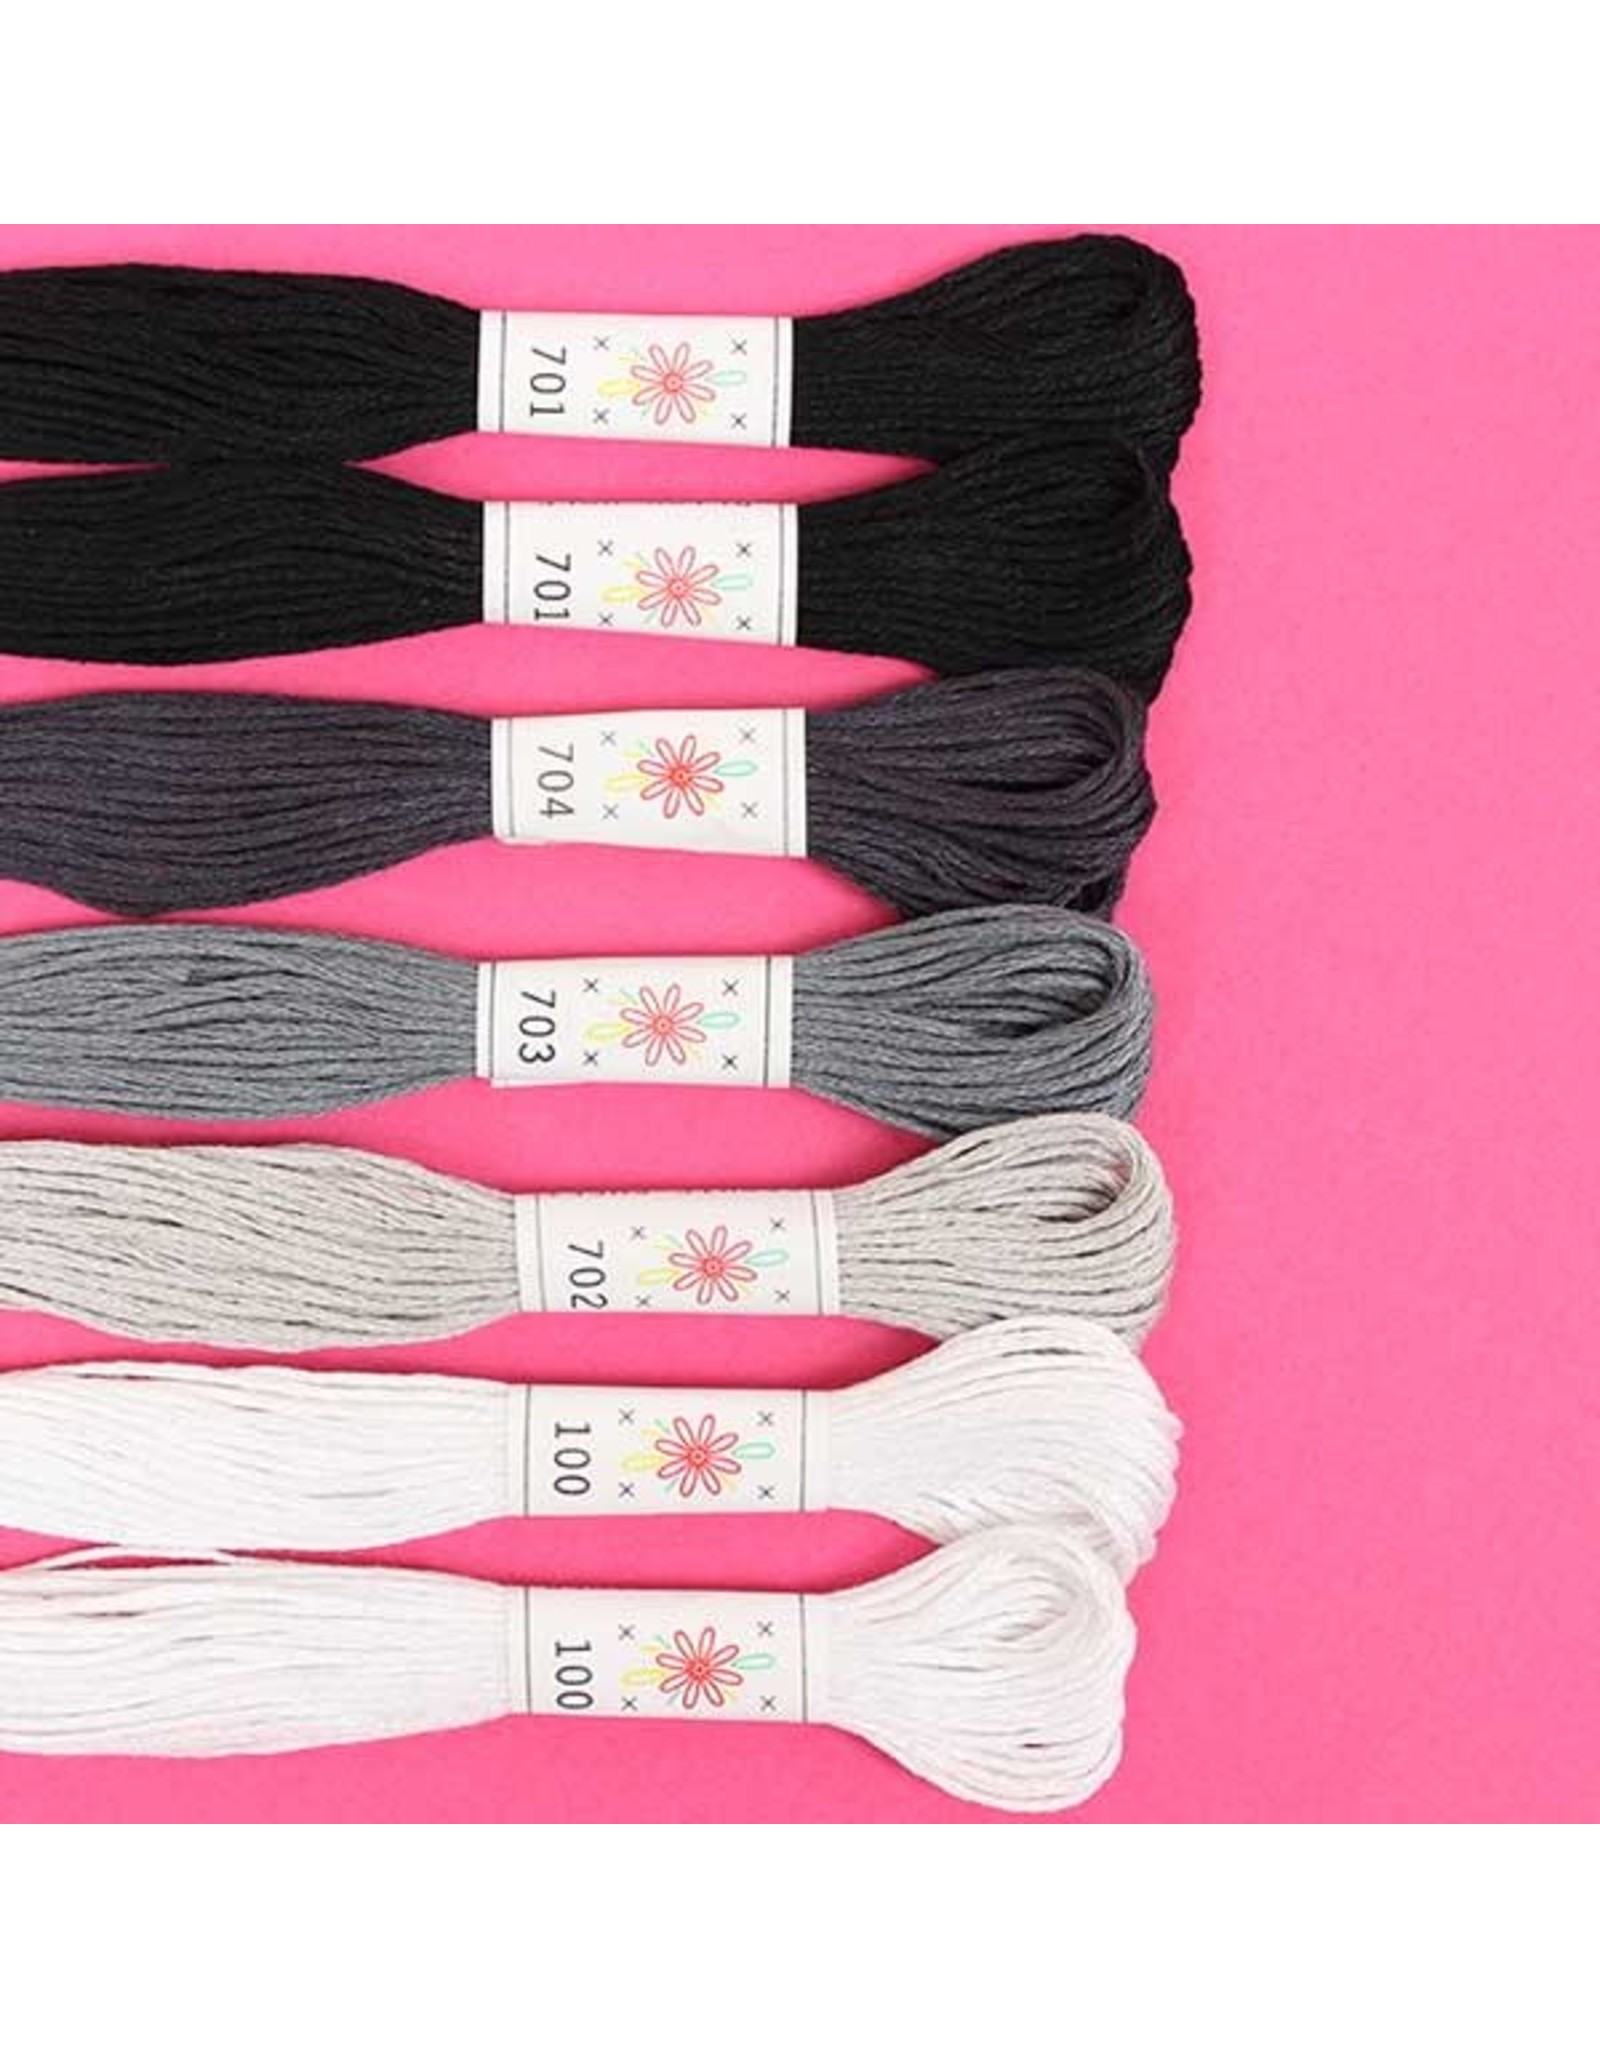 Sublime Stitching Embroidery Floss Set, Cosmos Palette - Seven 8.75 yard skeins